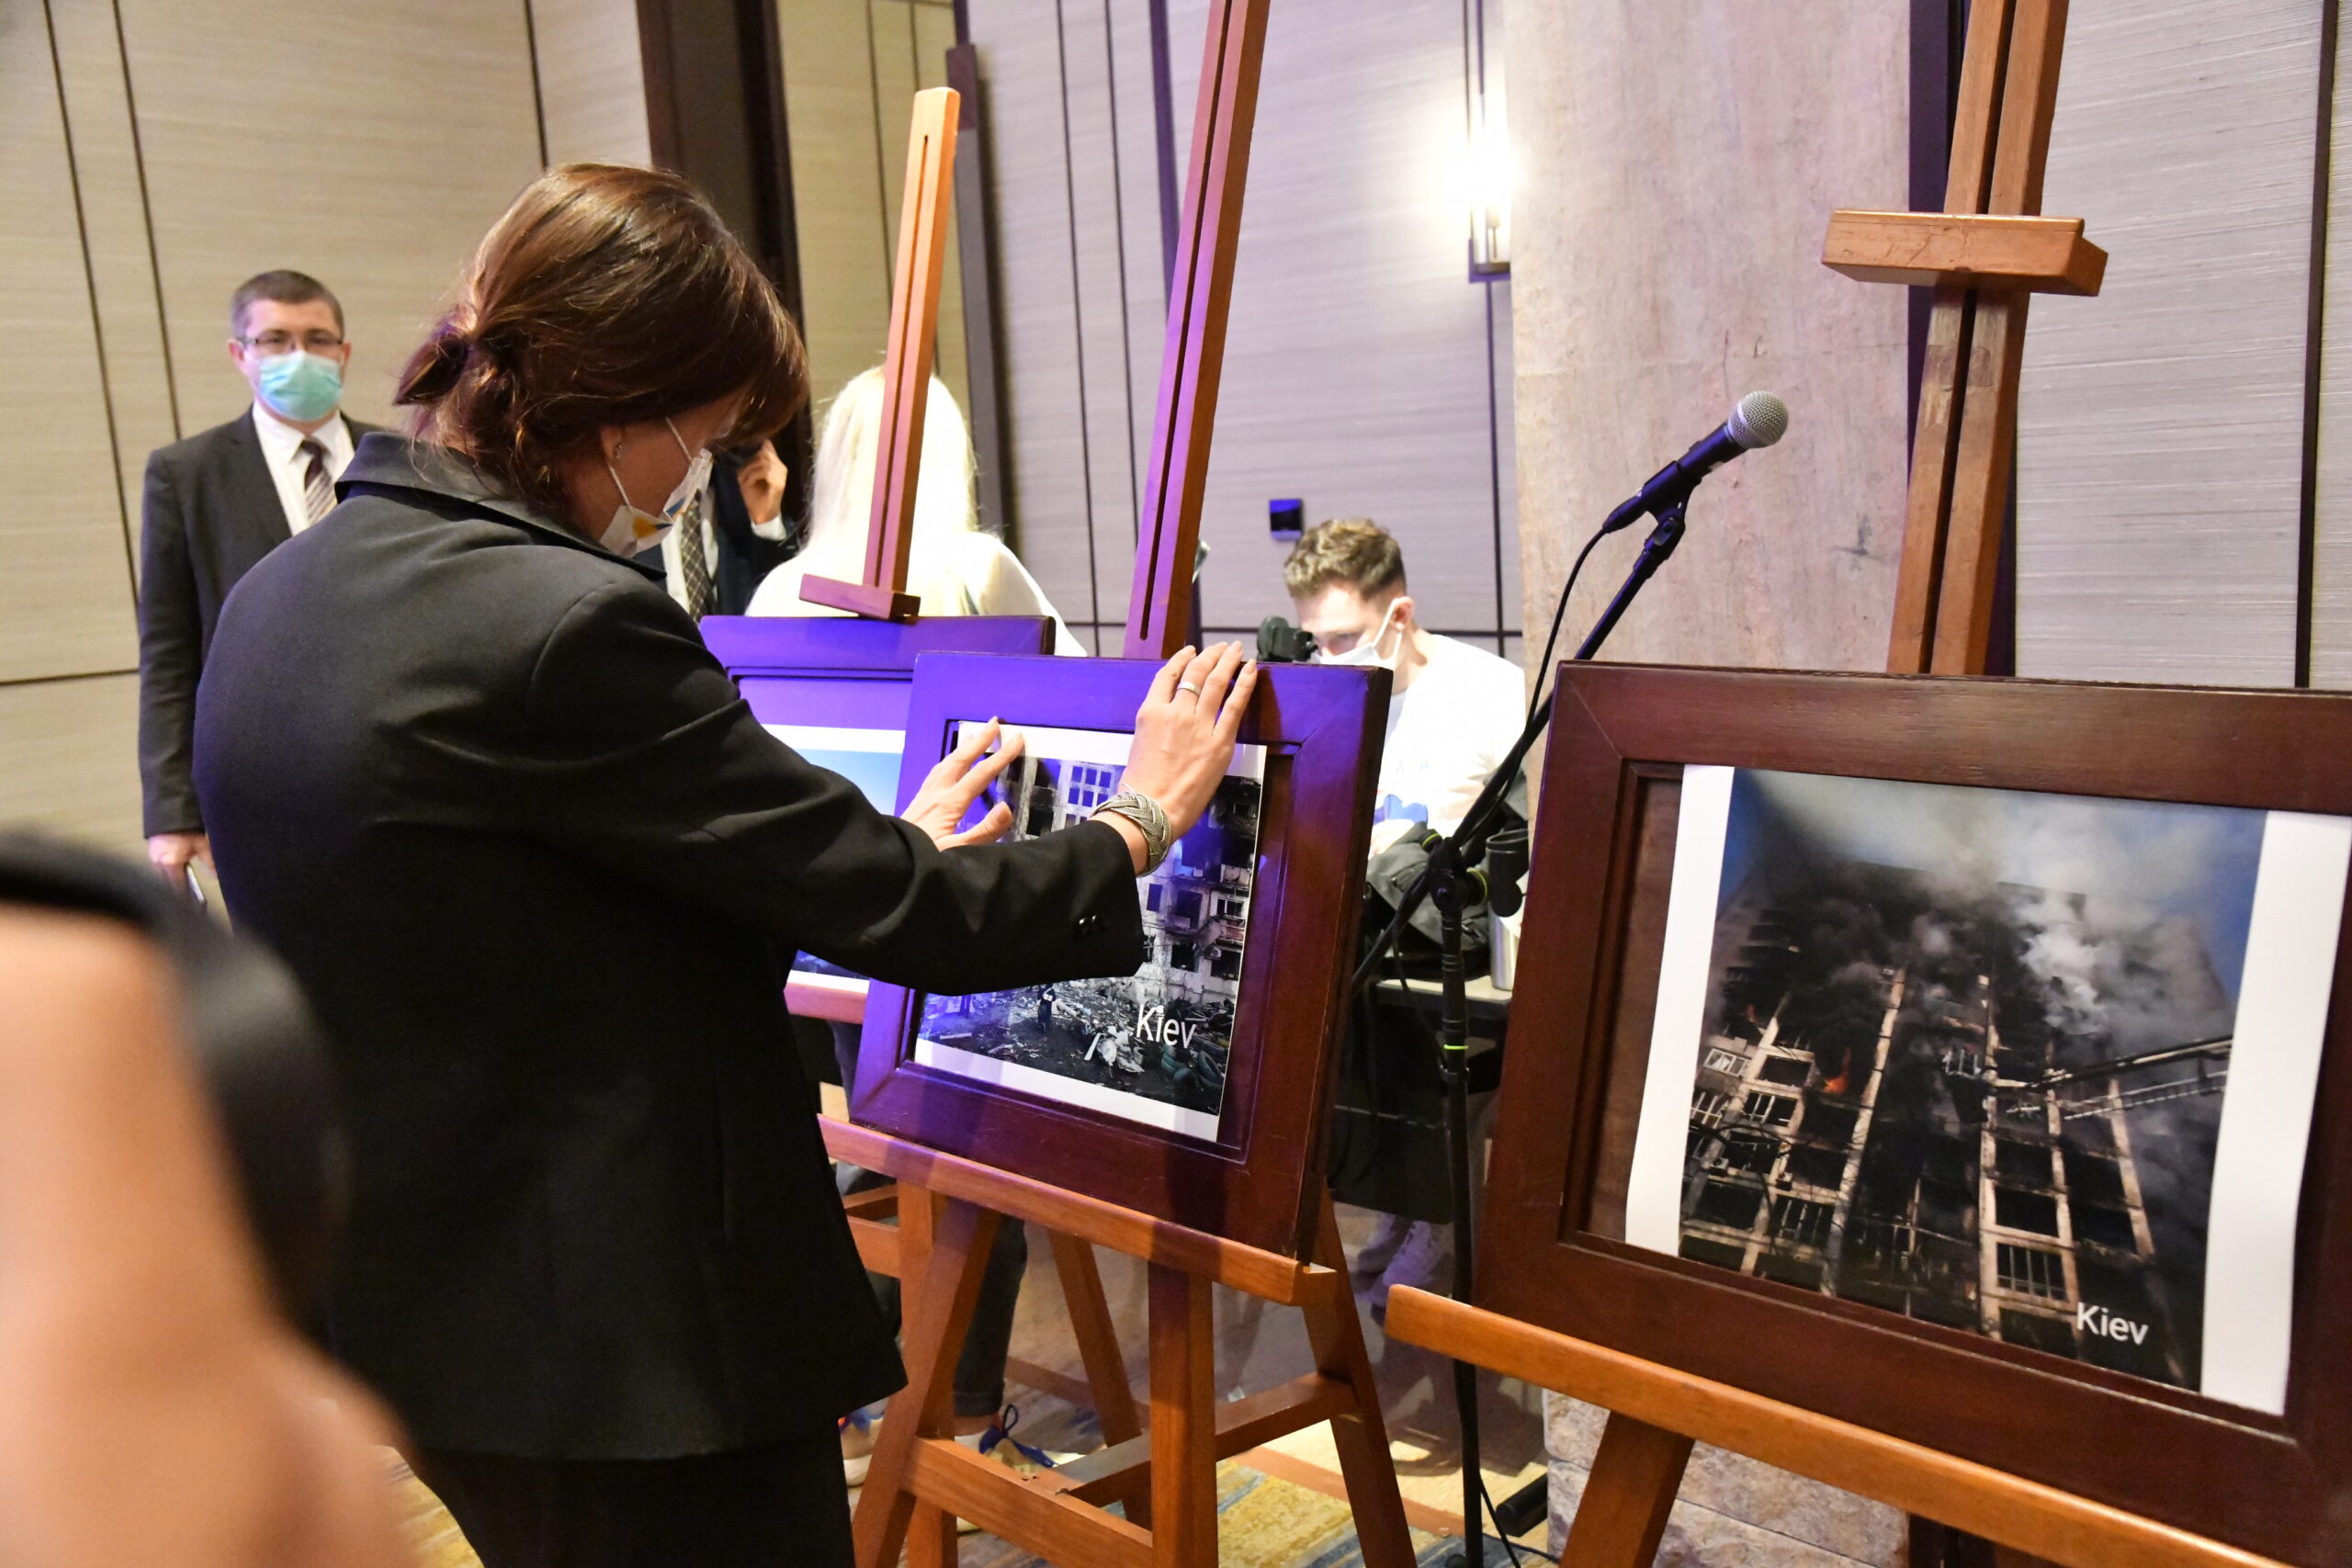 A woman looks at one of the photographs showing destruction in Ukraine on display at the event.